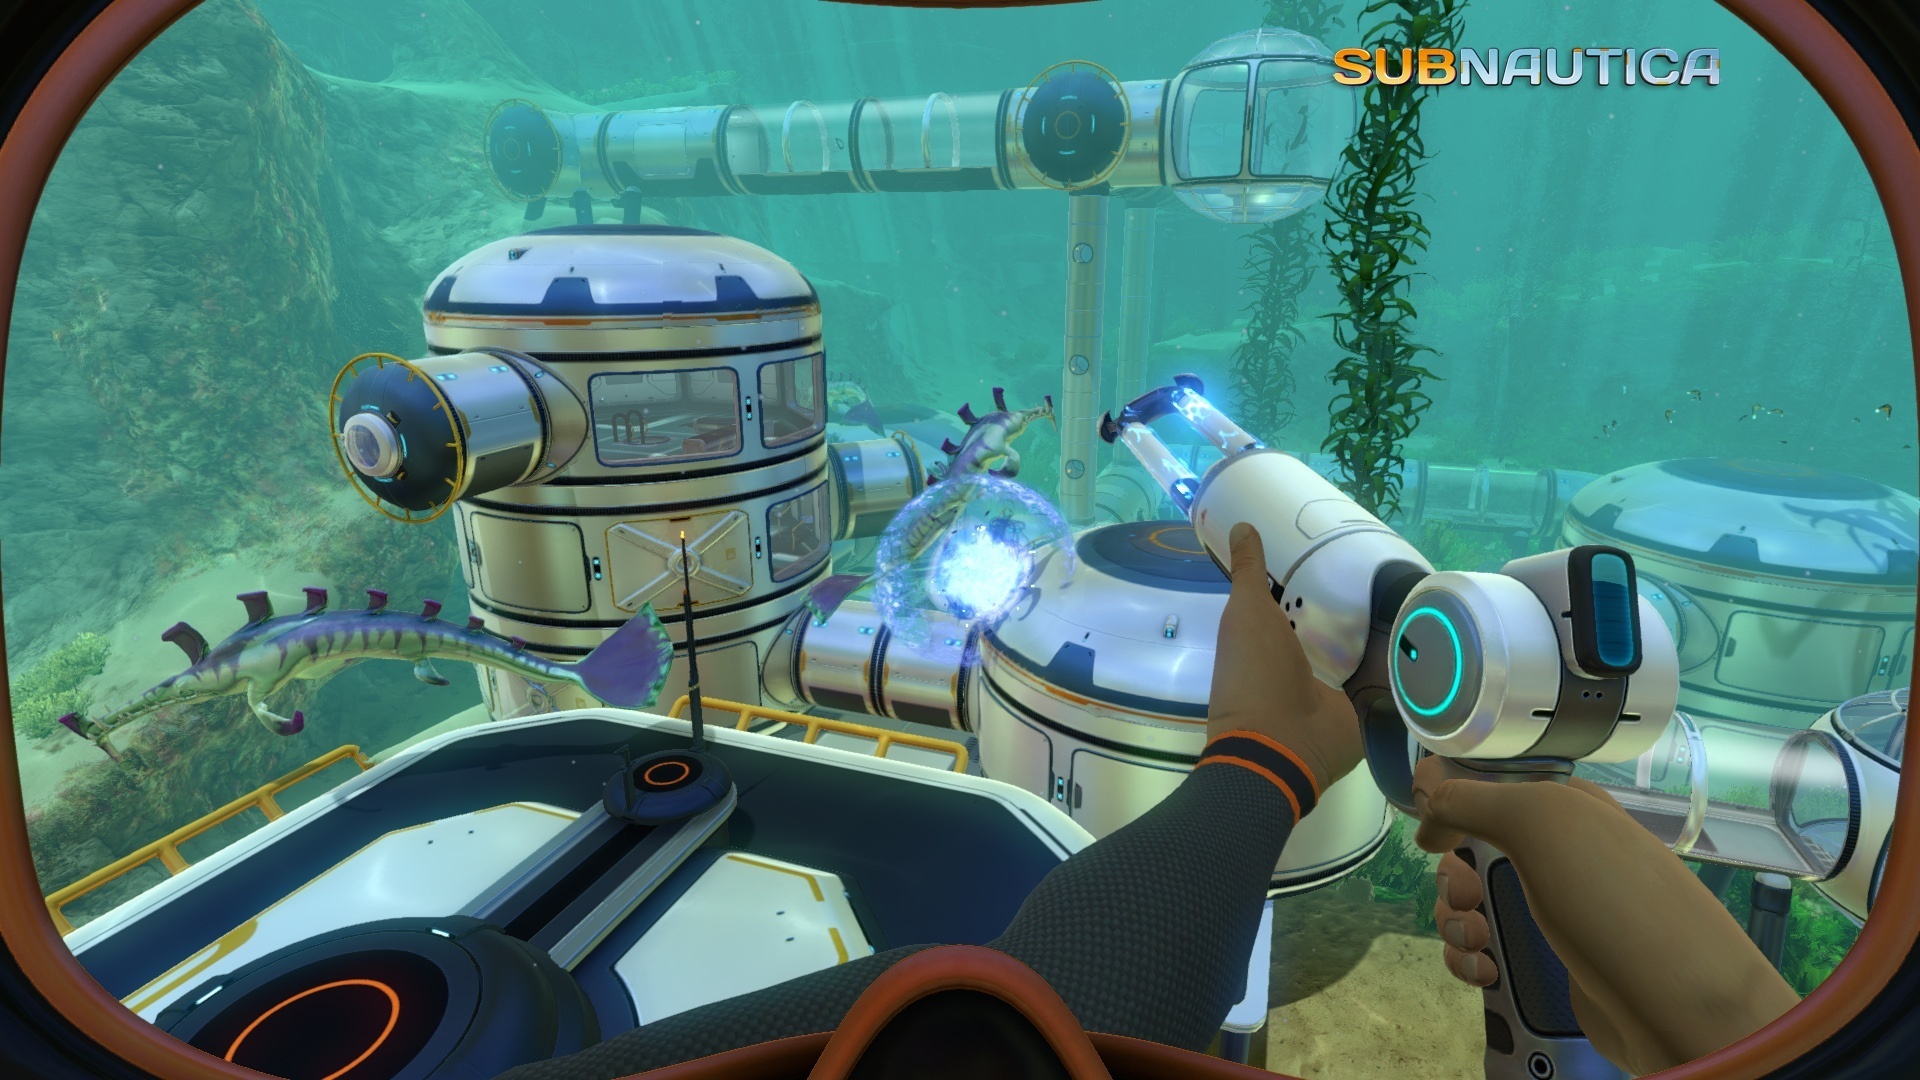 Subnautica gets a (blurry) graphics overhaul in the Eye Candy update